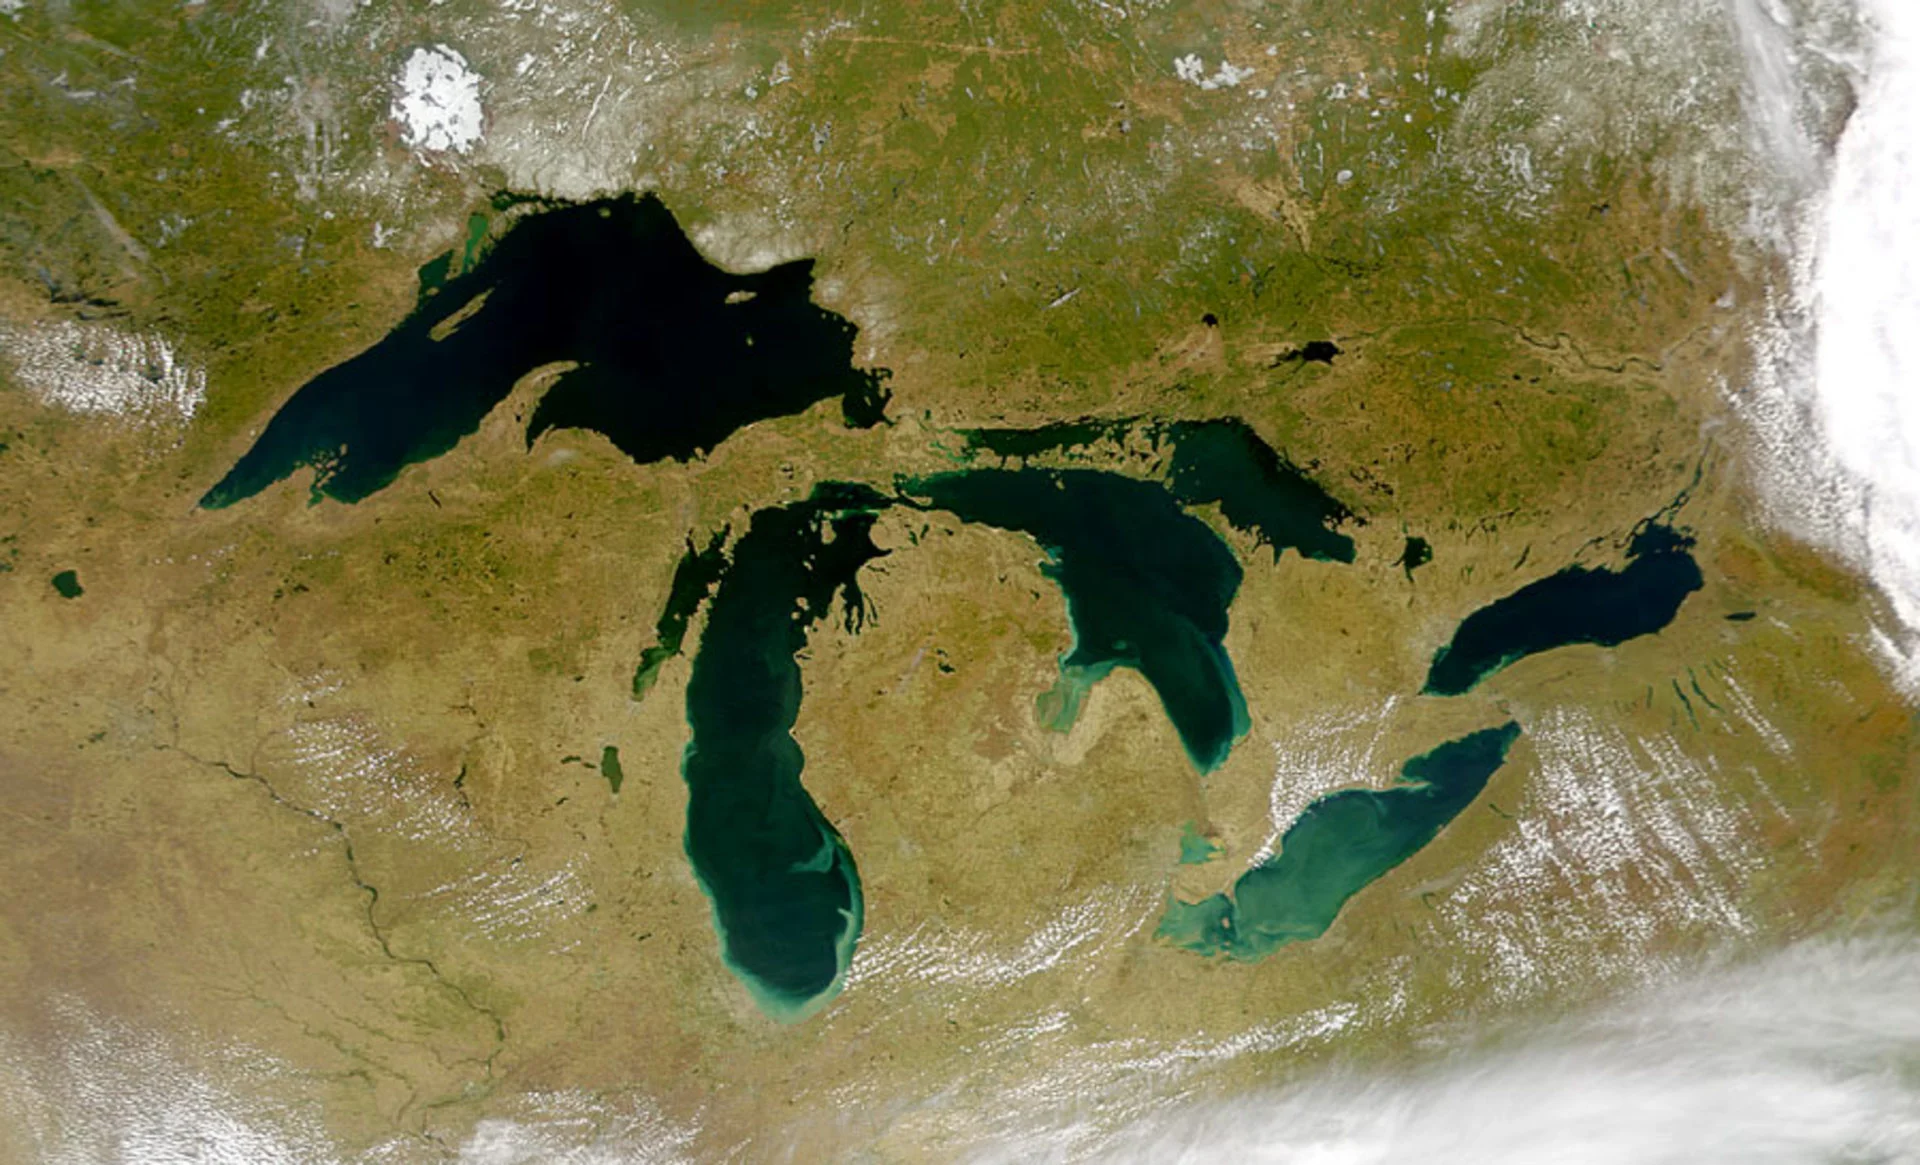 In honour of Great Lakes Awareness Day, here are 10 Great Lakes facts